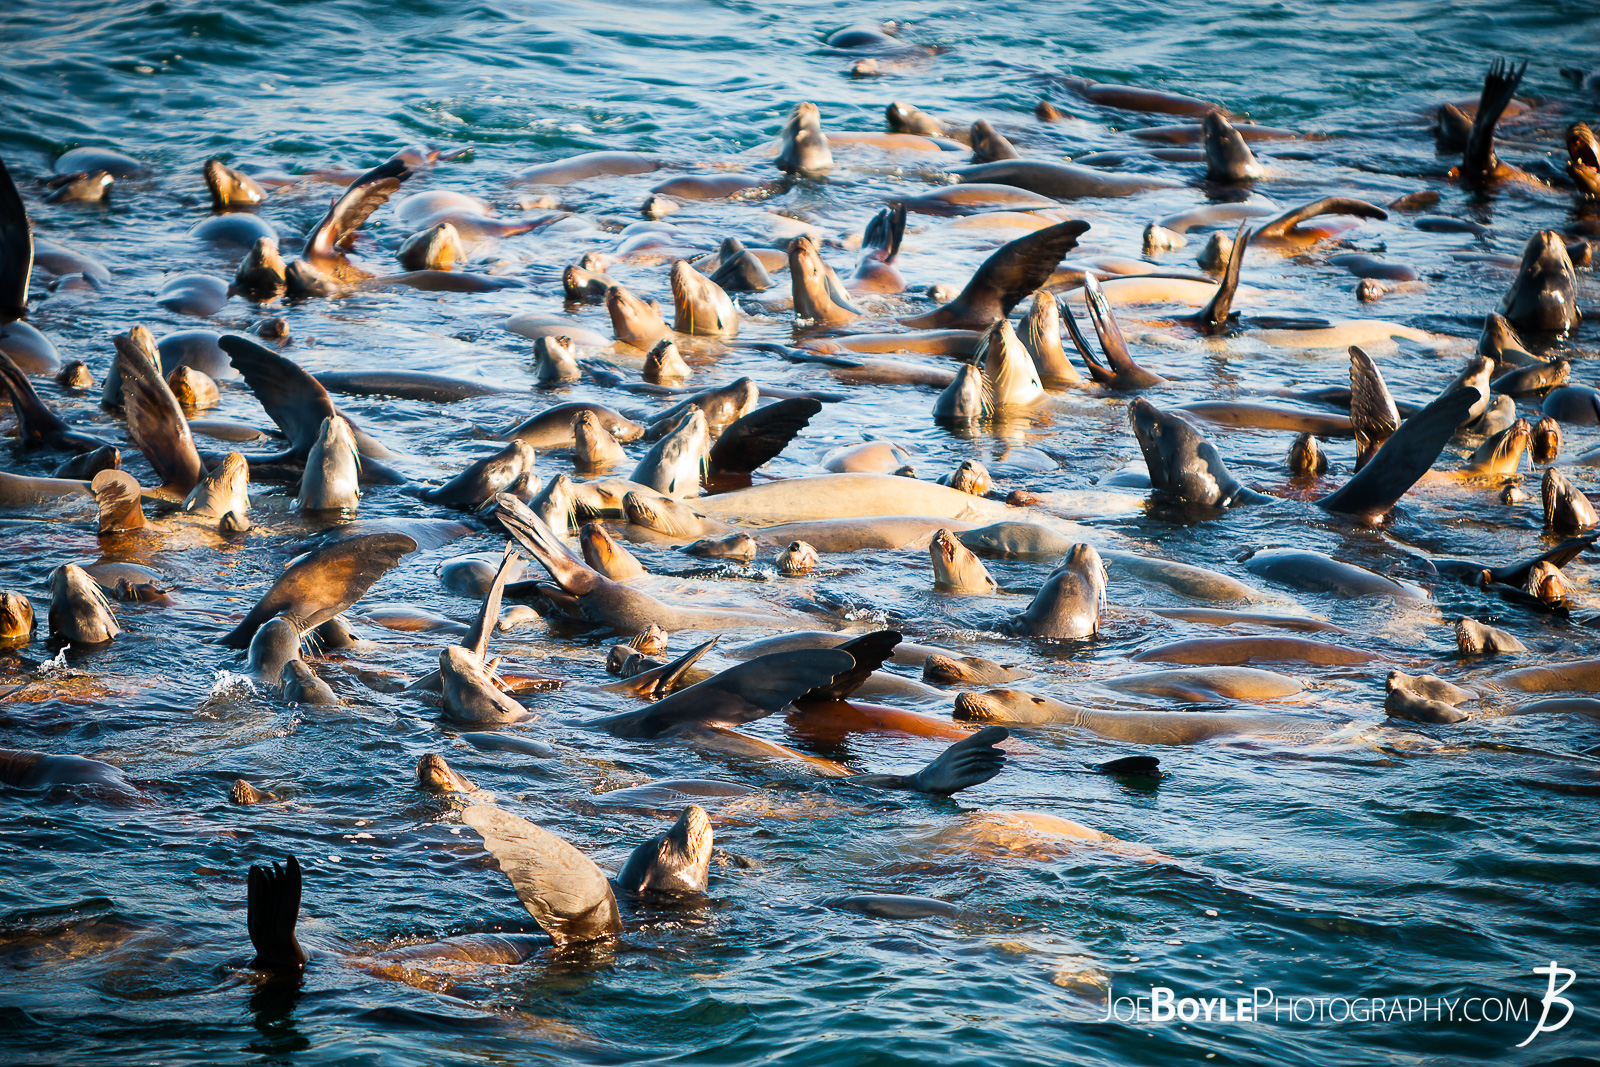  While I was visiting Monterey, California I saw this harem of Sea Lions off of one the piers! Pretty cool! They were in a frenzy - dinner must have been close by! 